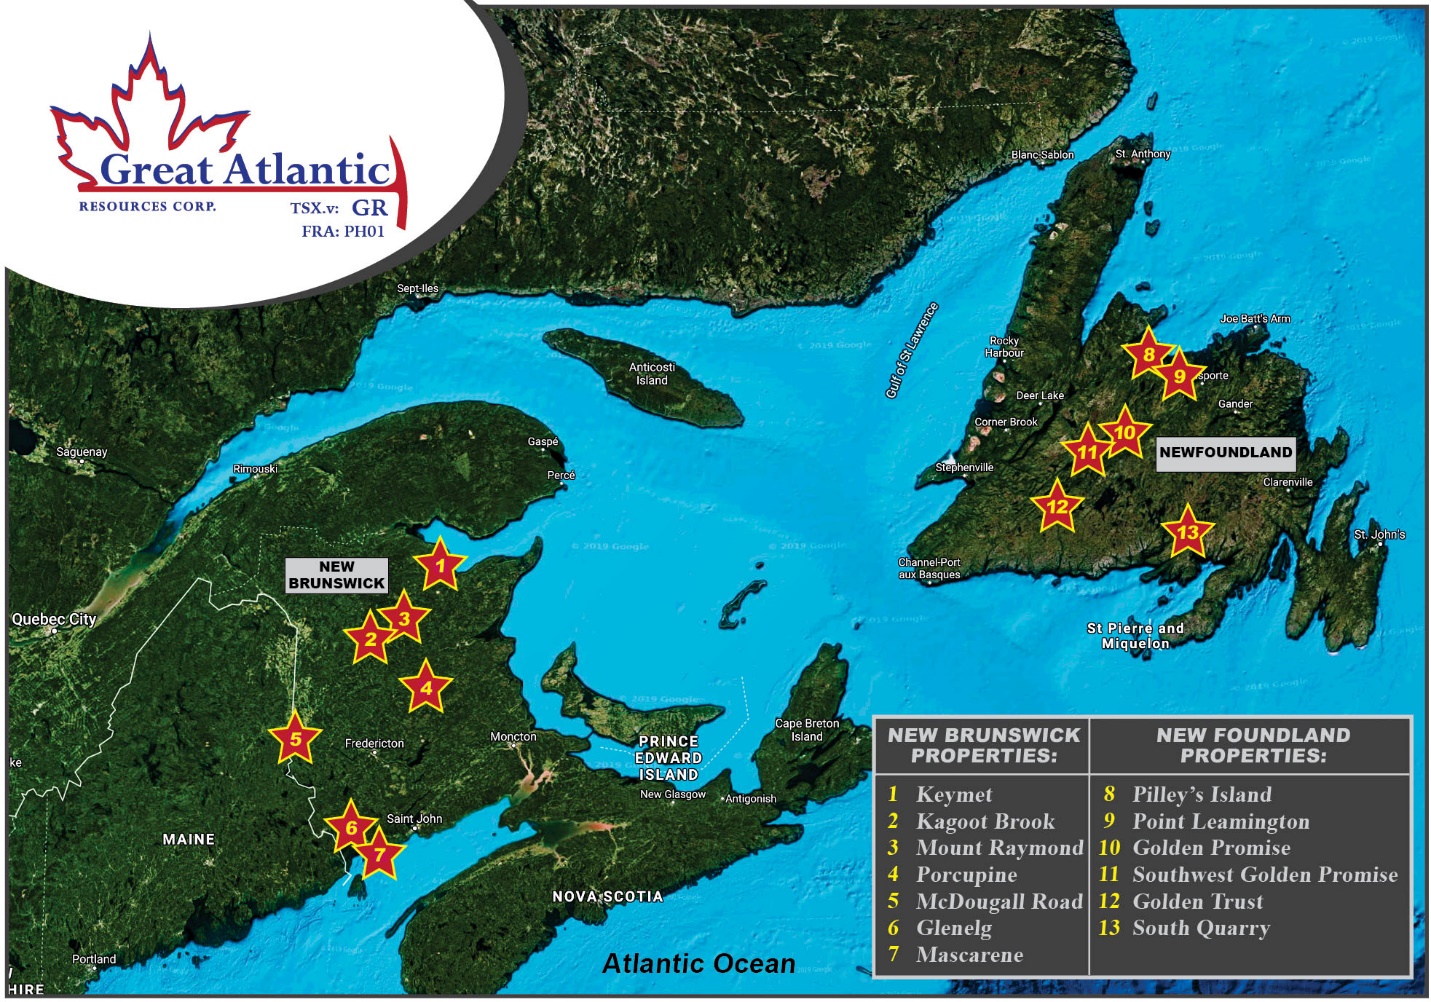 Great Atlantic Resources Corp., Thursday, August 6, 2020, Press release picture